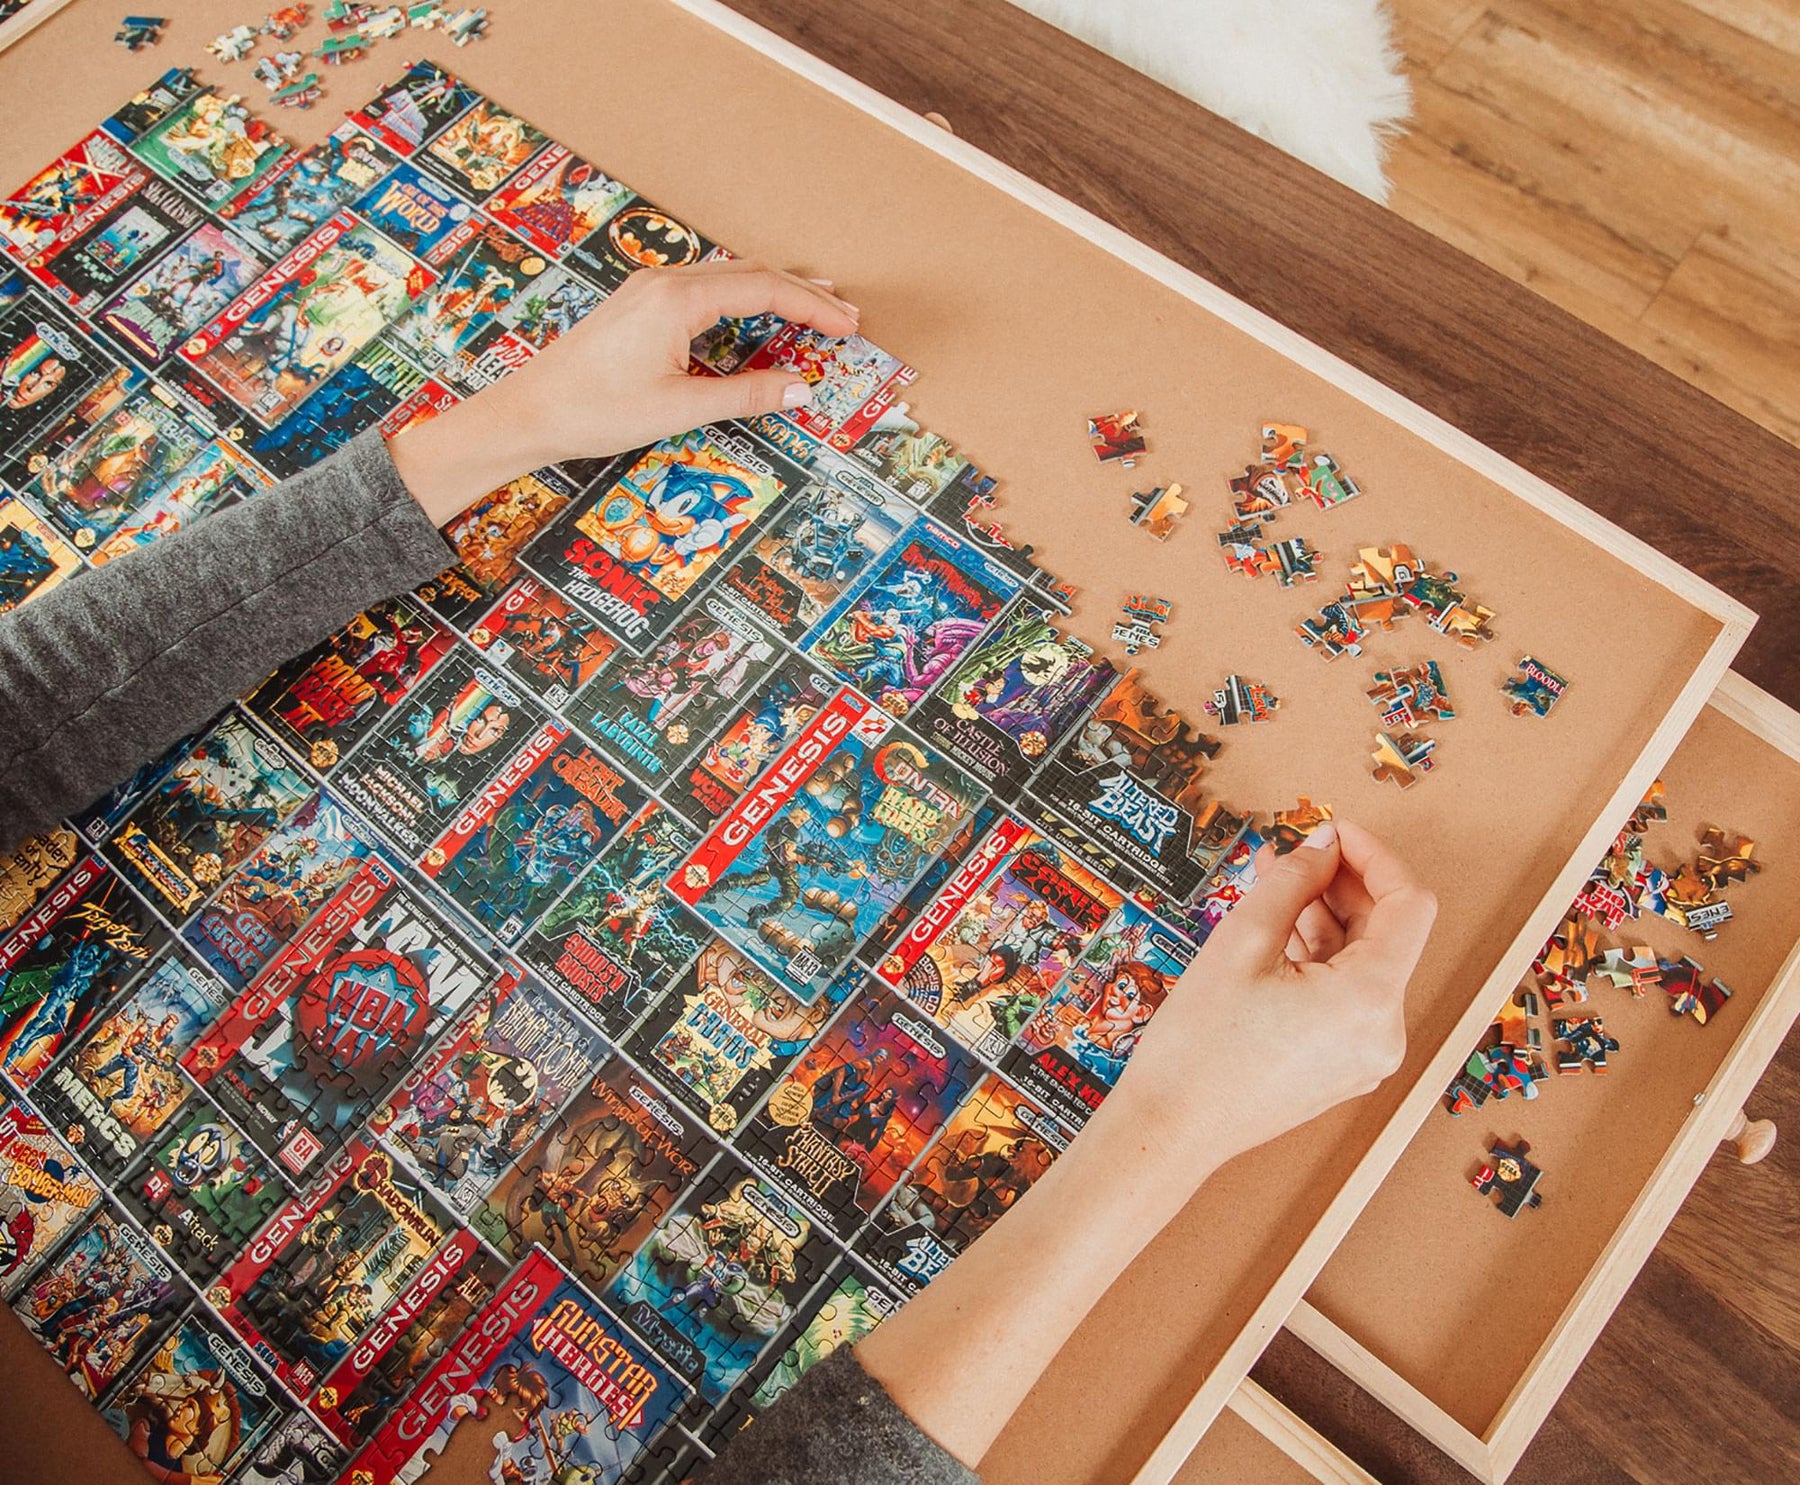 The Genesis of Gaming 1000-Piece Jigsaw Puzzle